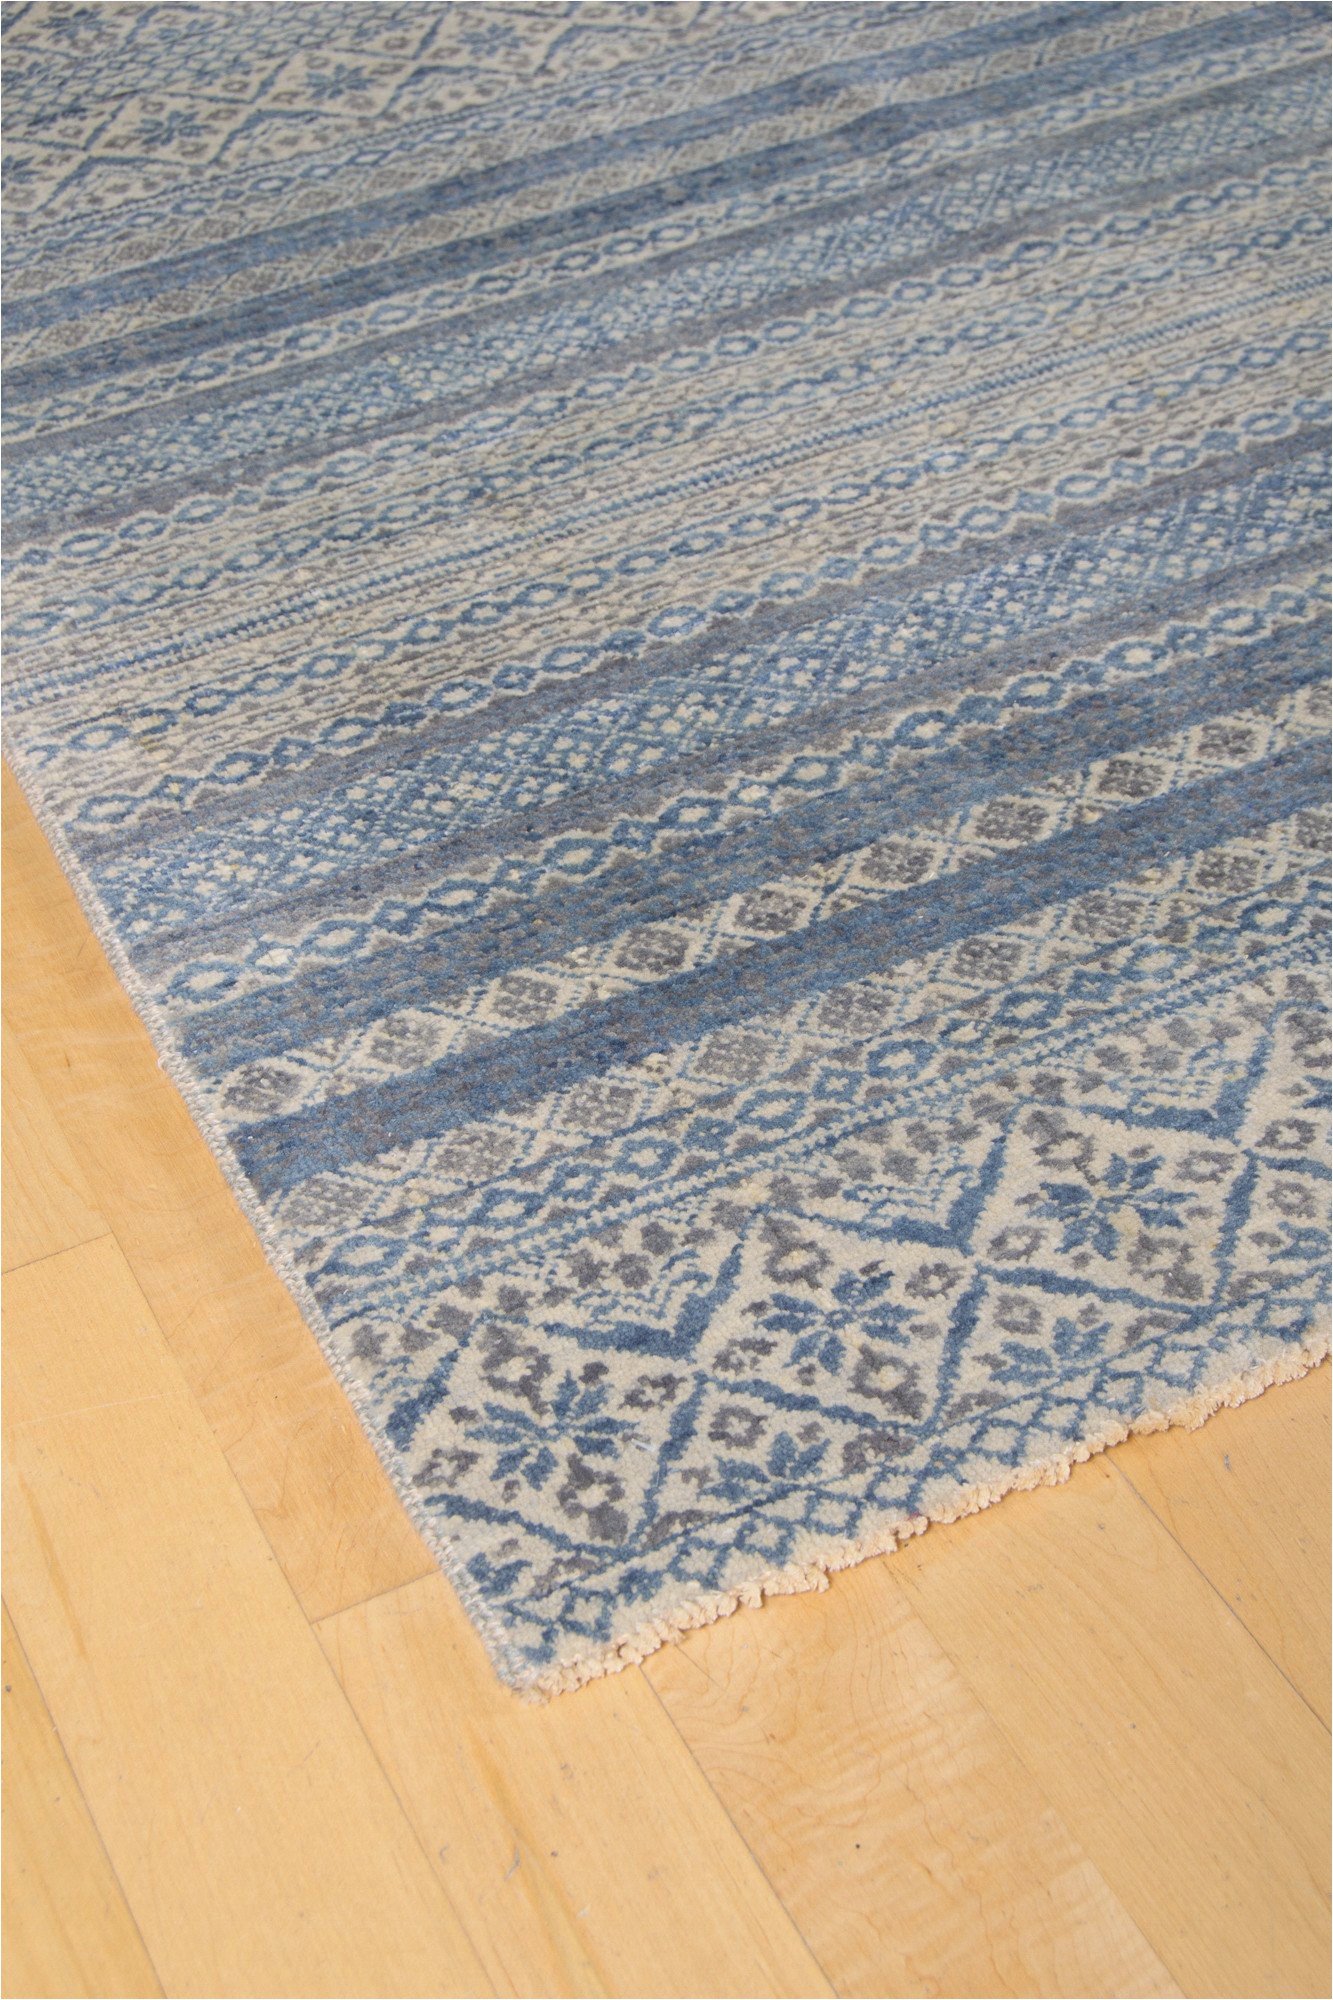 Blue and Gray Striped Rug Blue & Grey Striped Rug 8×10 – the Artisan S Bench